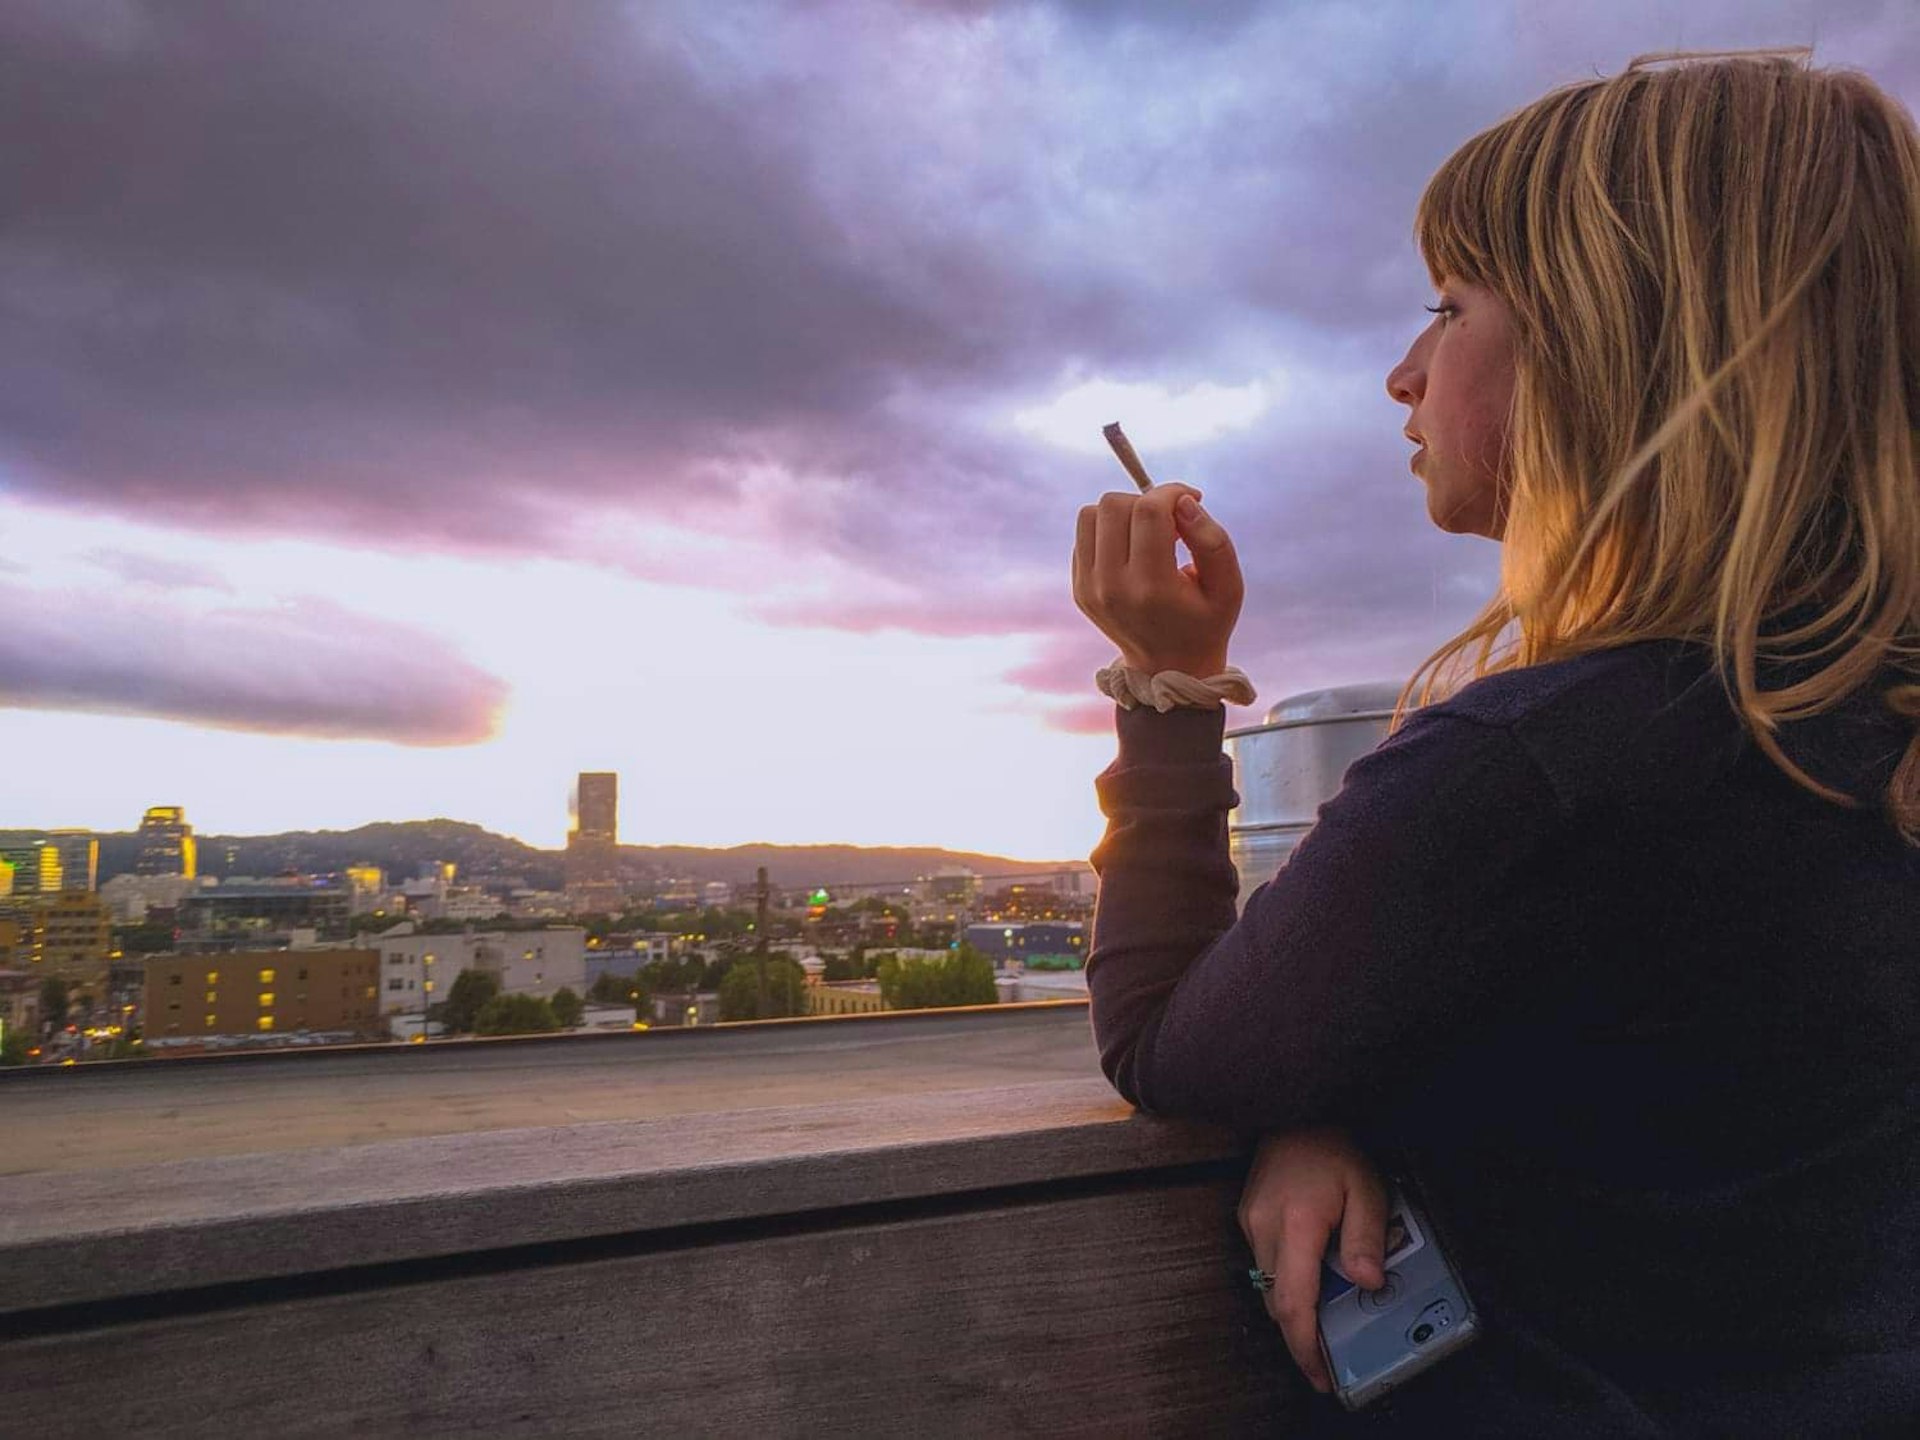 A young woman with red hair holds a joint in her left hand as she looks out over the Portland, Oregon skyline at dusk